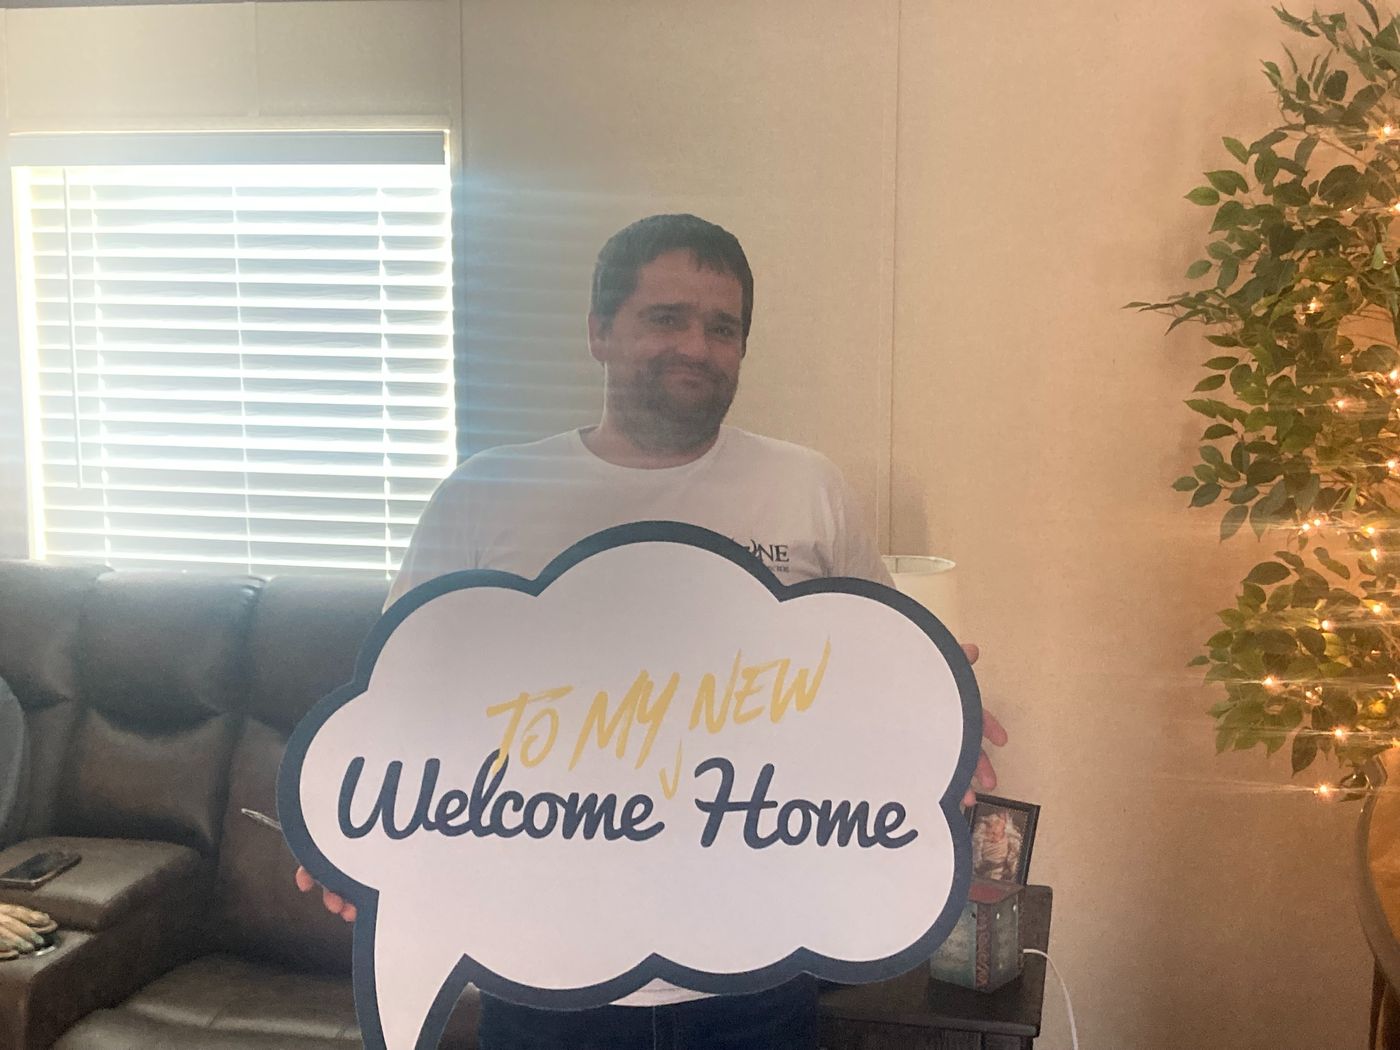 JACK P. welcome home image